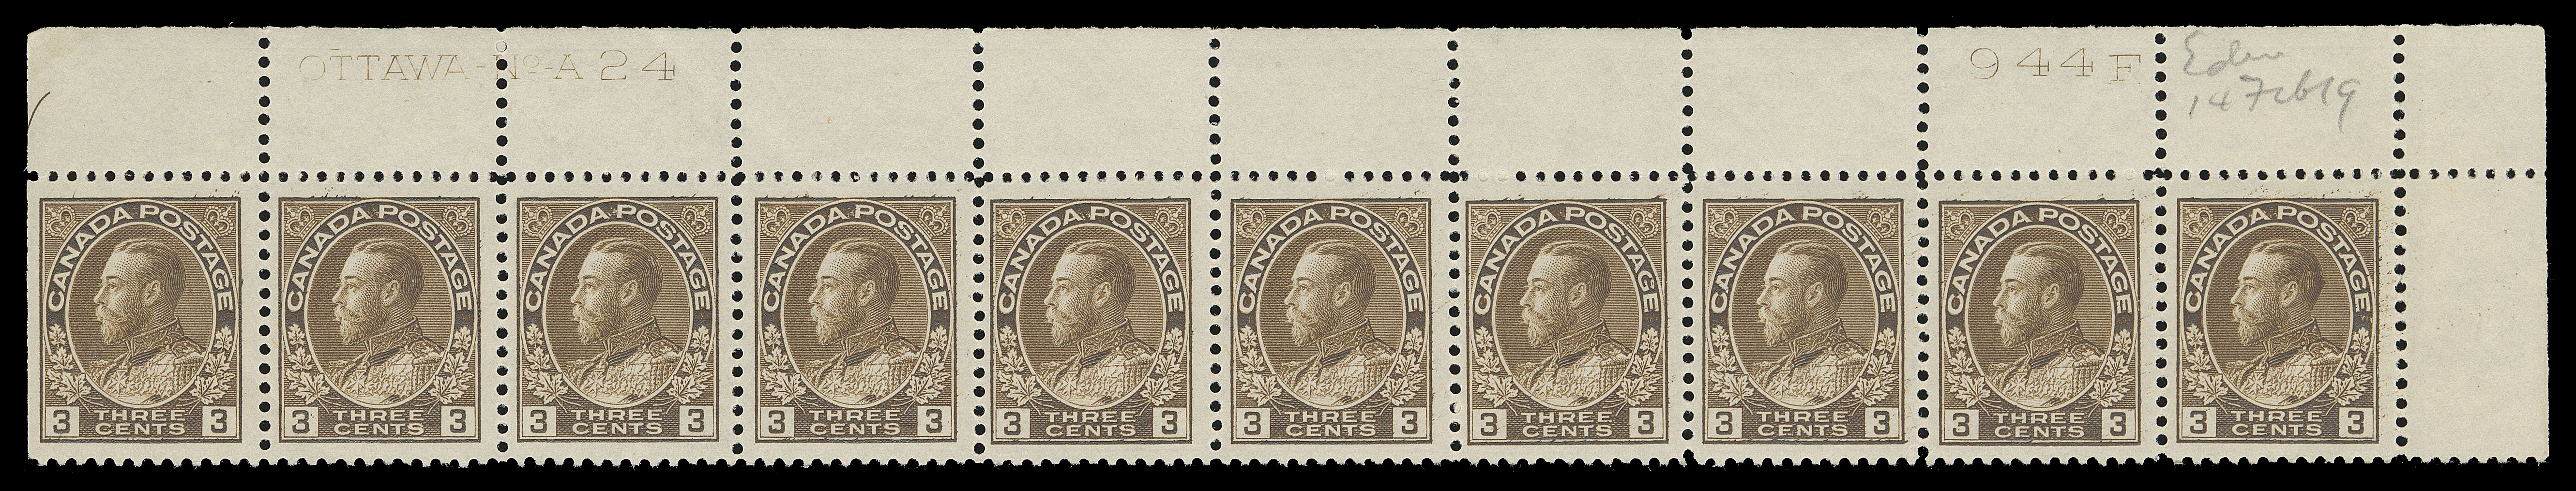 ADMIRAL STAMPS  108b,The scarcer shade in a well centered upper right Plate 24 strip of ten, LH in selvedge at top left and on straight edged stamp, other nine are VF NH; pencil "14 Feb 19" date of acquisition. (Unitrade cat. $1,820)